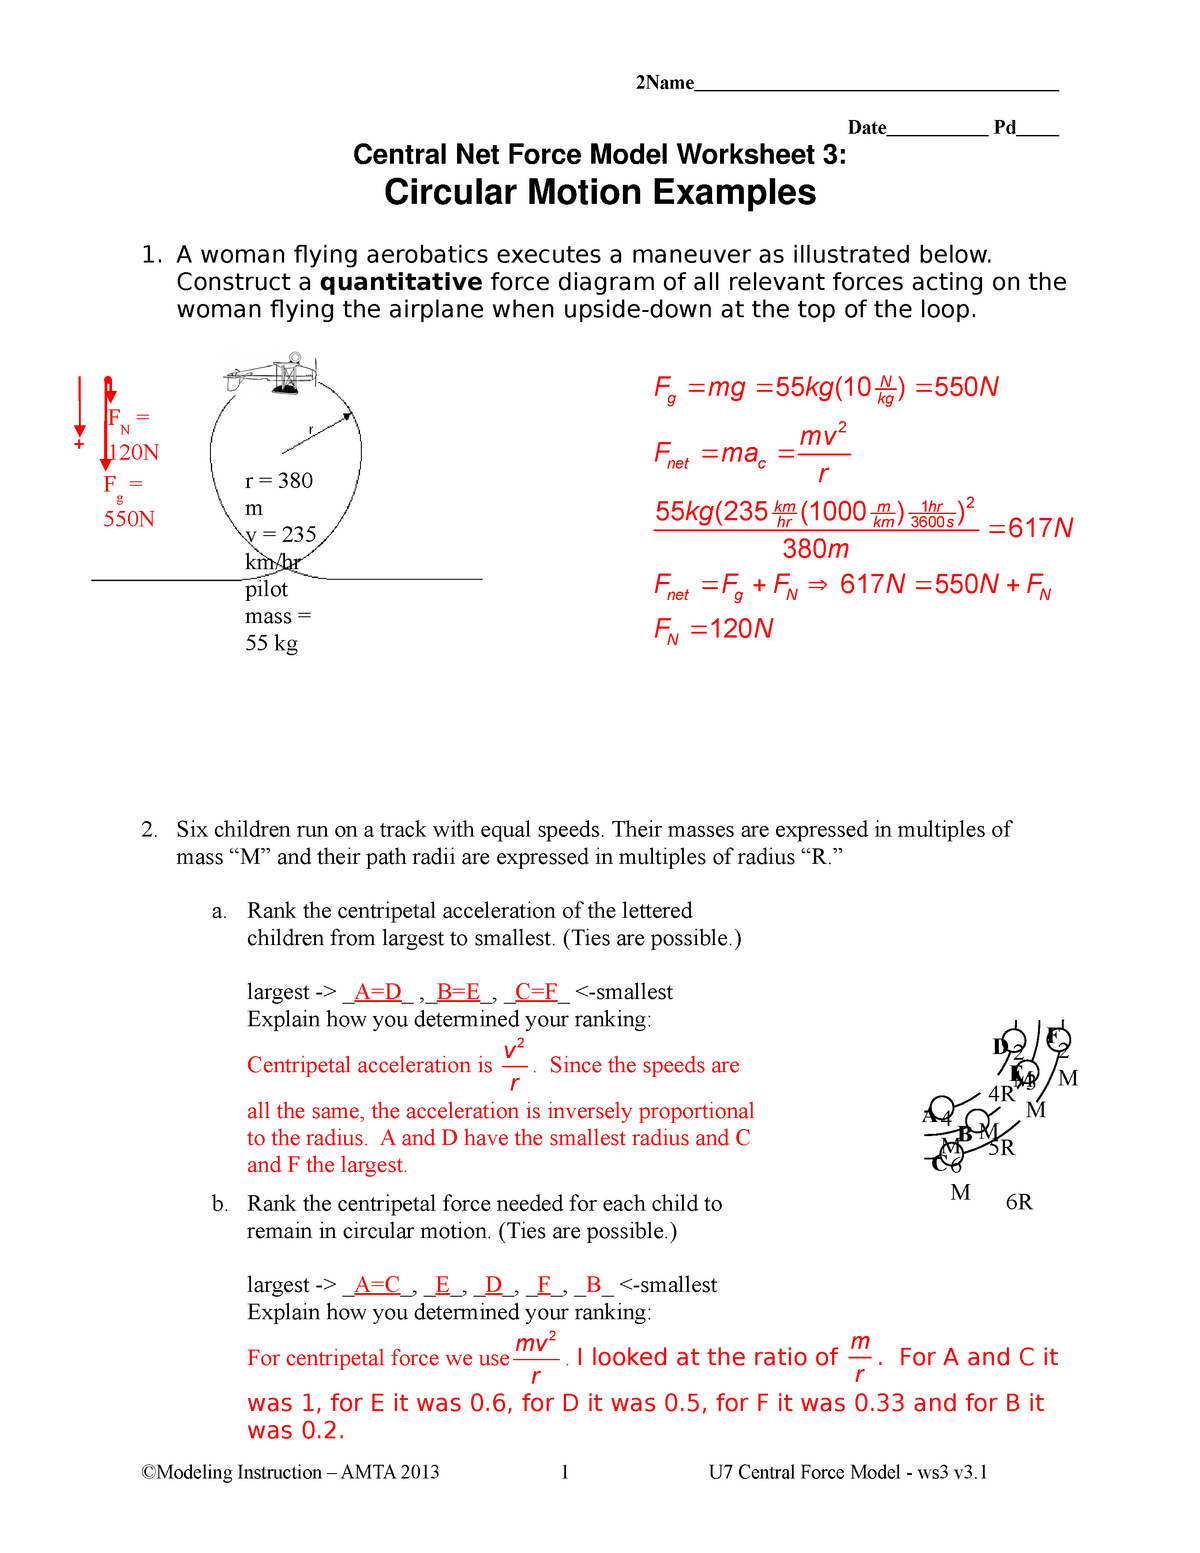 Circular motion w21 -answers - PHY-21 - General Physics I - Durham Within Forces Worksheet 1 Answer Key